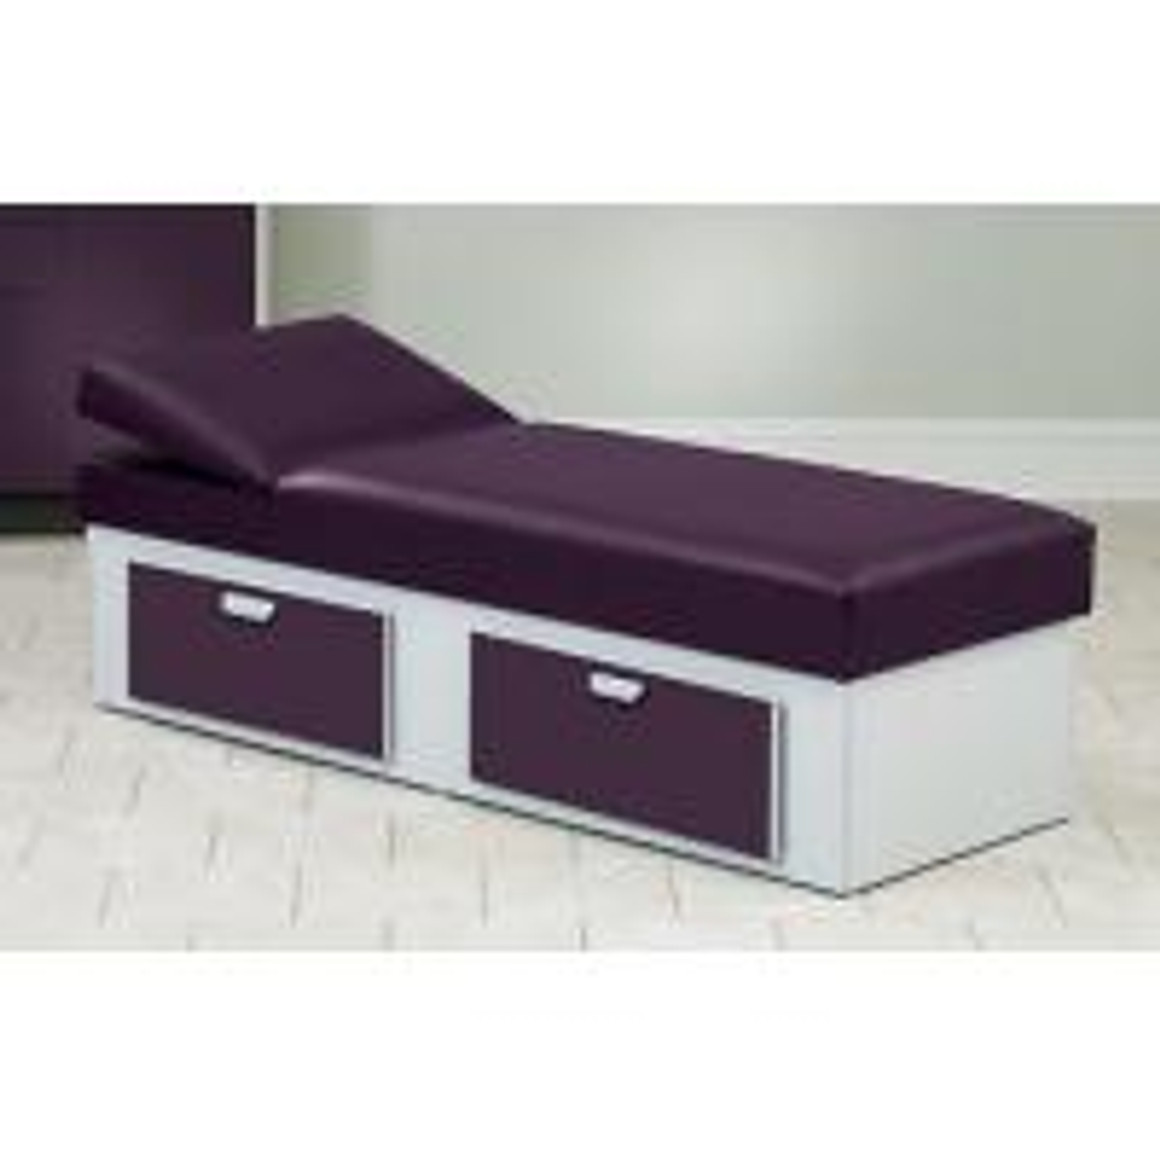 Clinton Upholstered Apron Couch with Double Drawer Storage, Burgundy